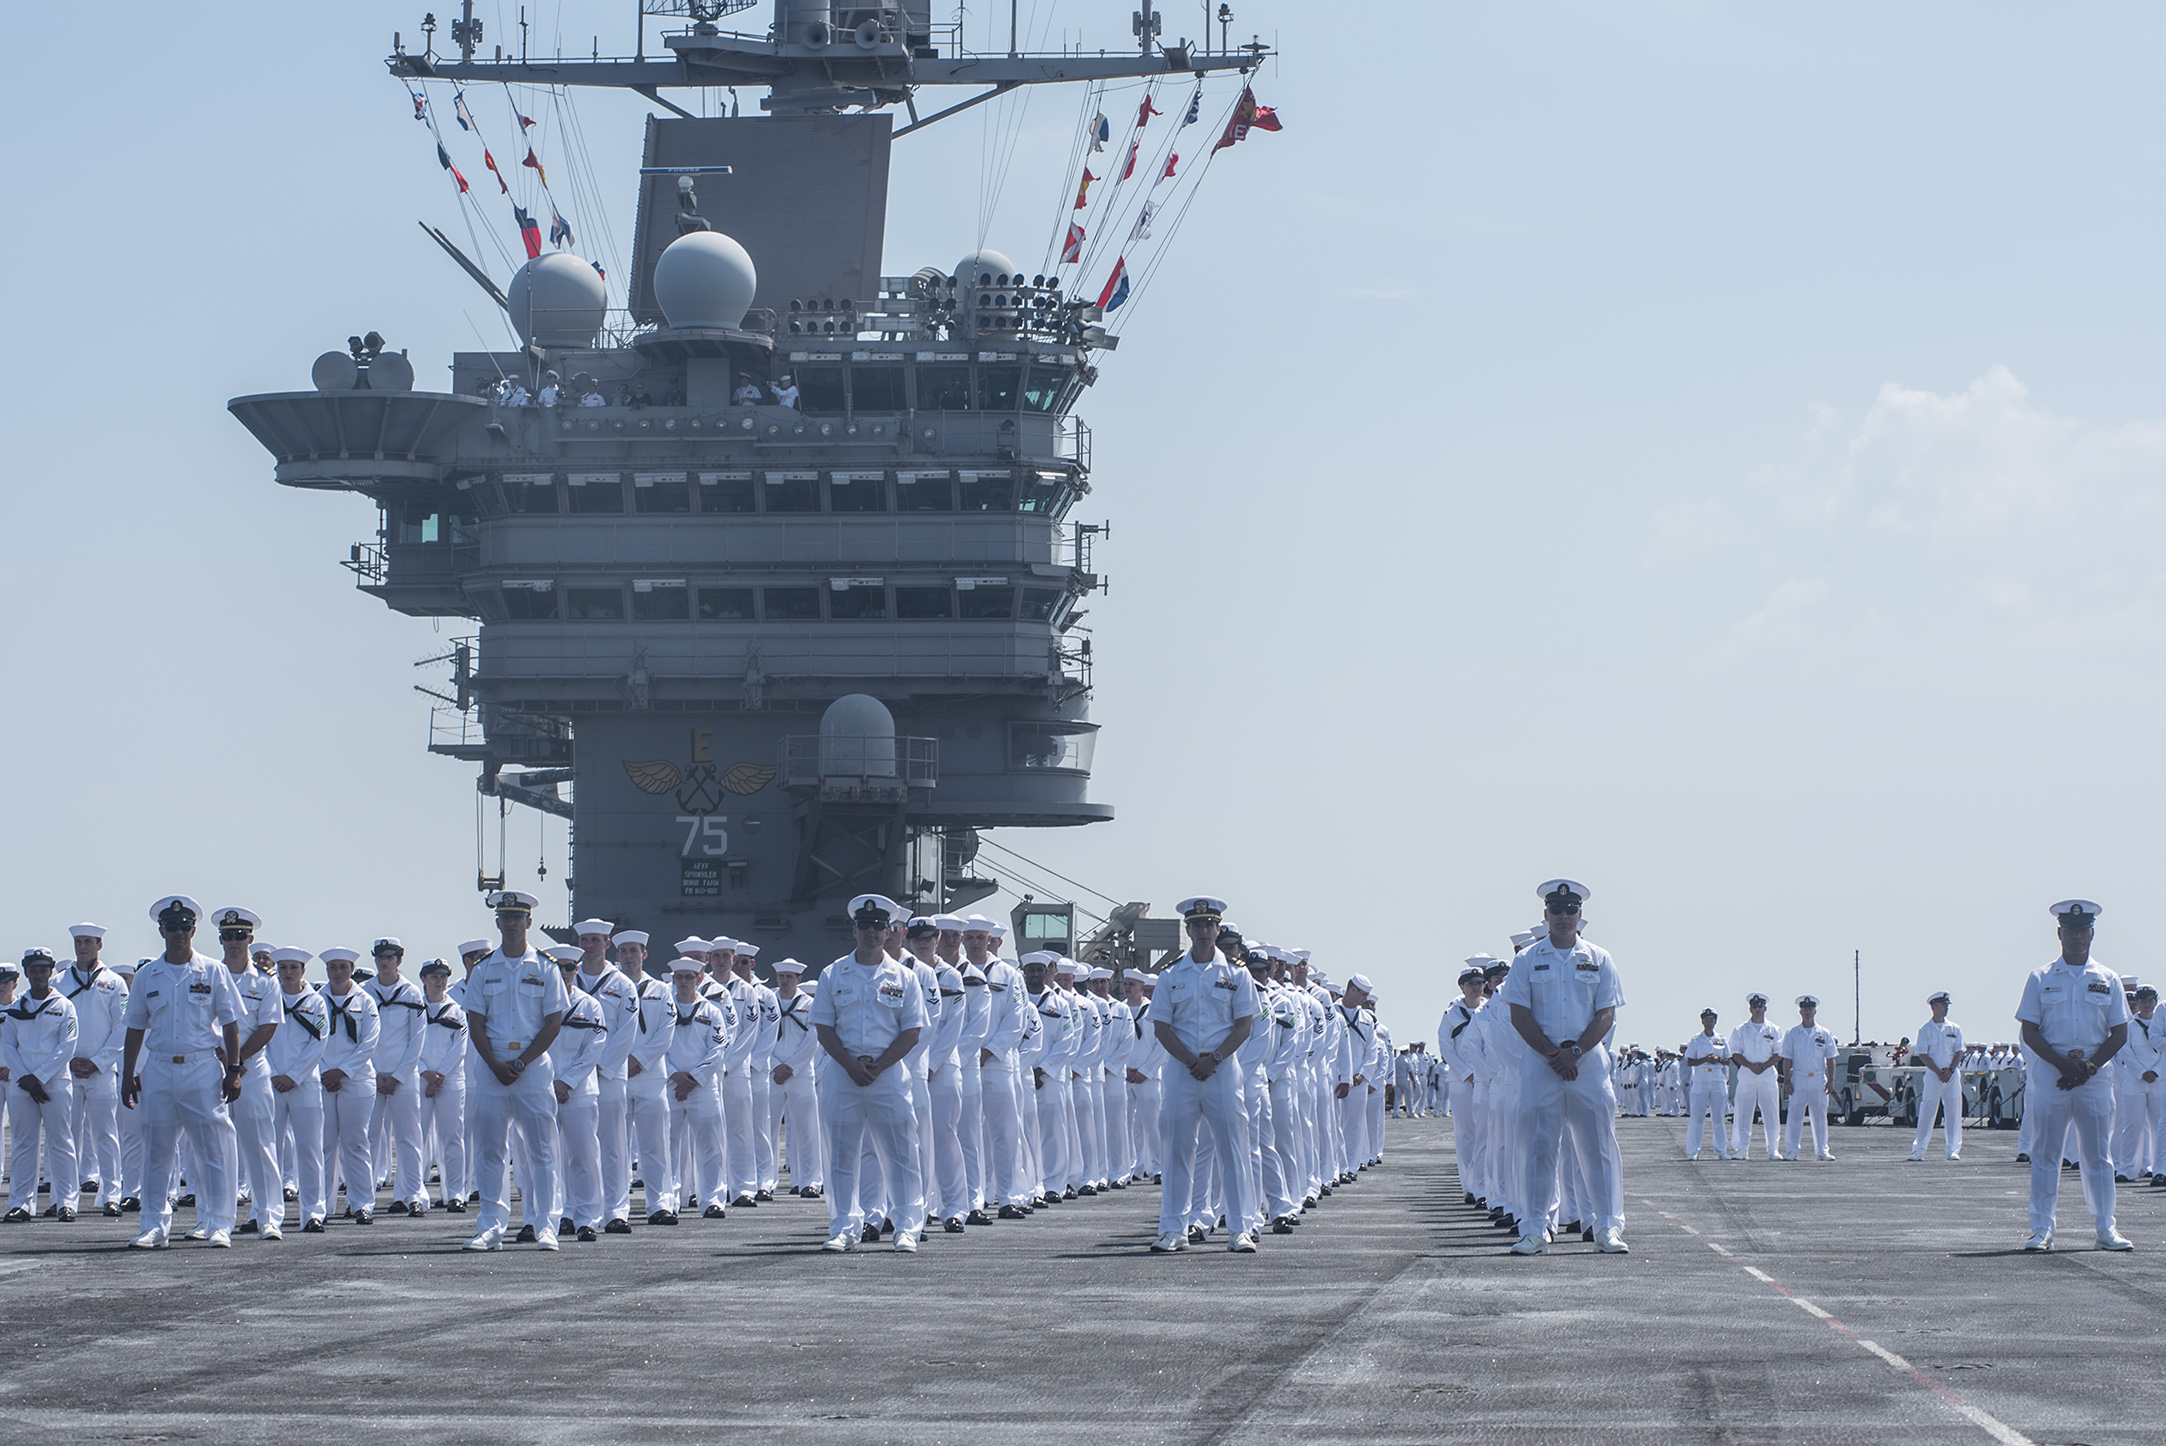 Sailors prepare to man the rails aboard the aircraft carrier USS Harry S. Truman (CVN-75) as it returns to homeport at Naval Station Norfolk, Va. on July 13, 2016. US Navy Photo